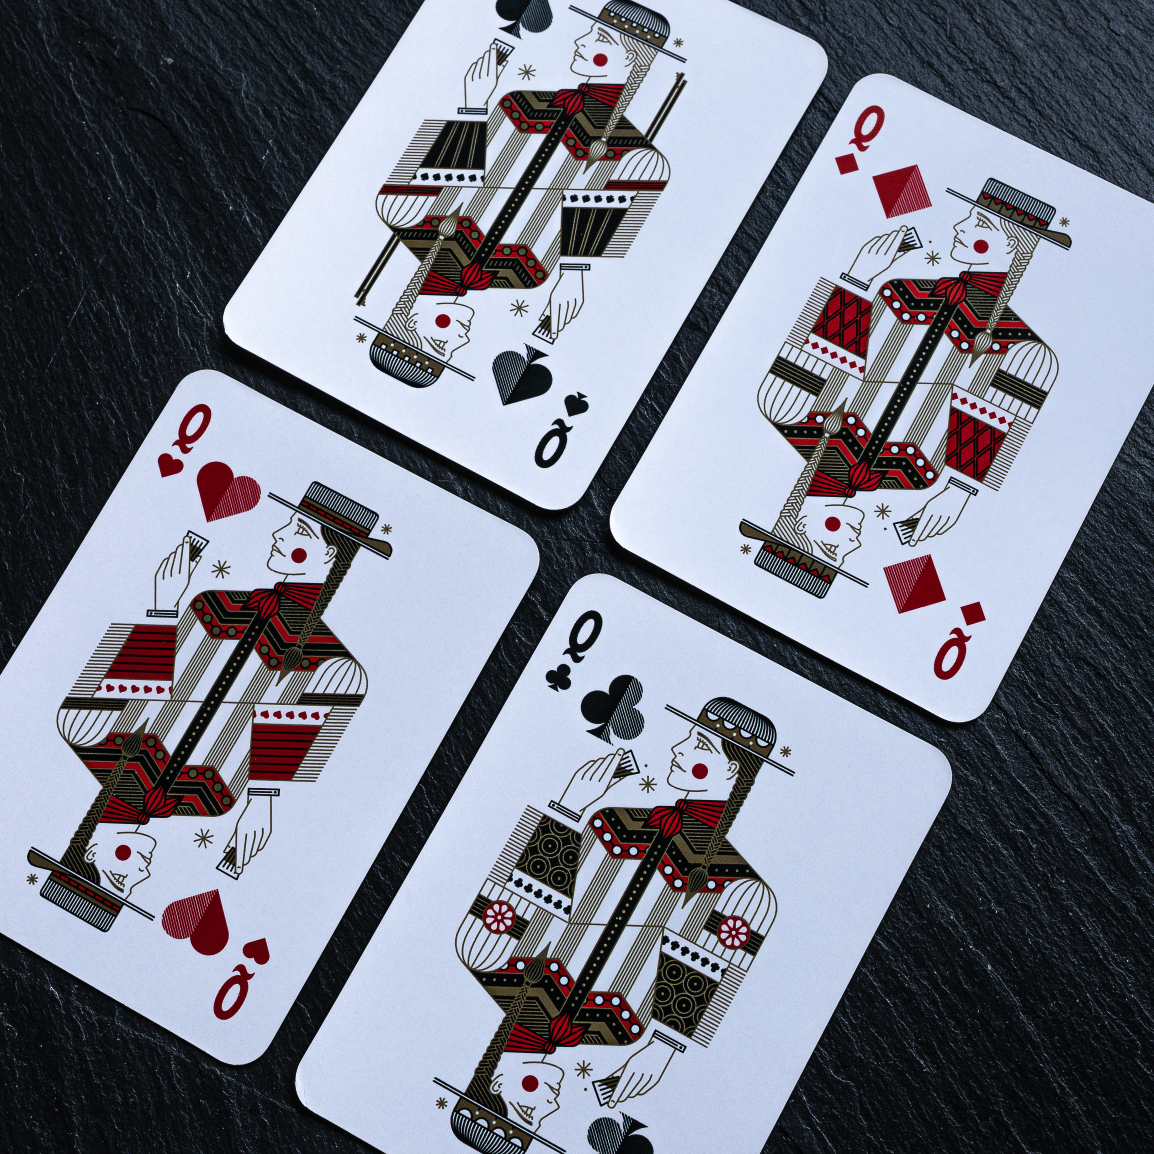 Whiskey Poker Playing Cards